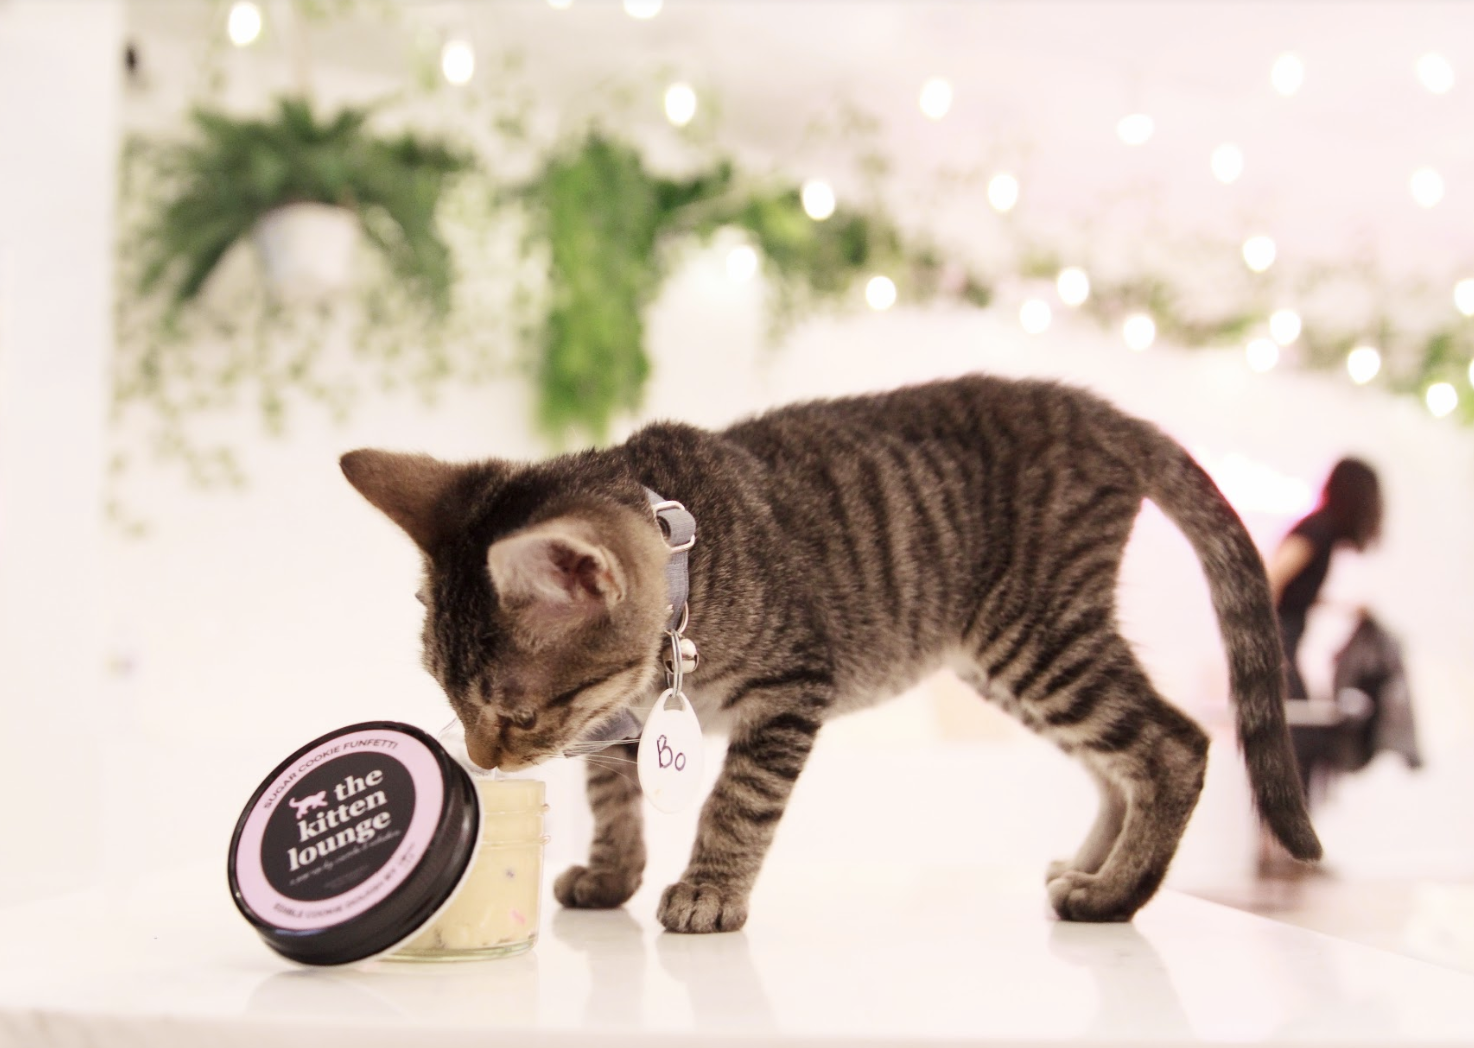 You Can Eat Cookie Dough and Play With Kittens at This Pop-Up Lounge